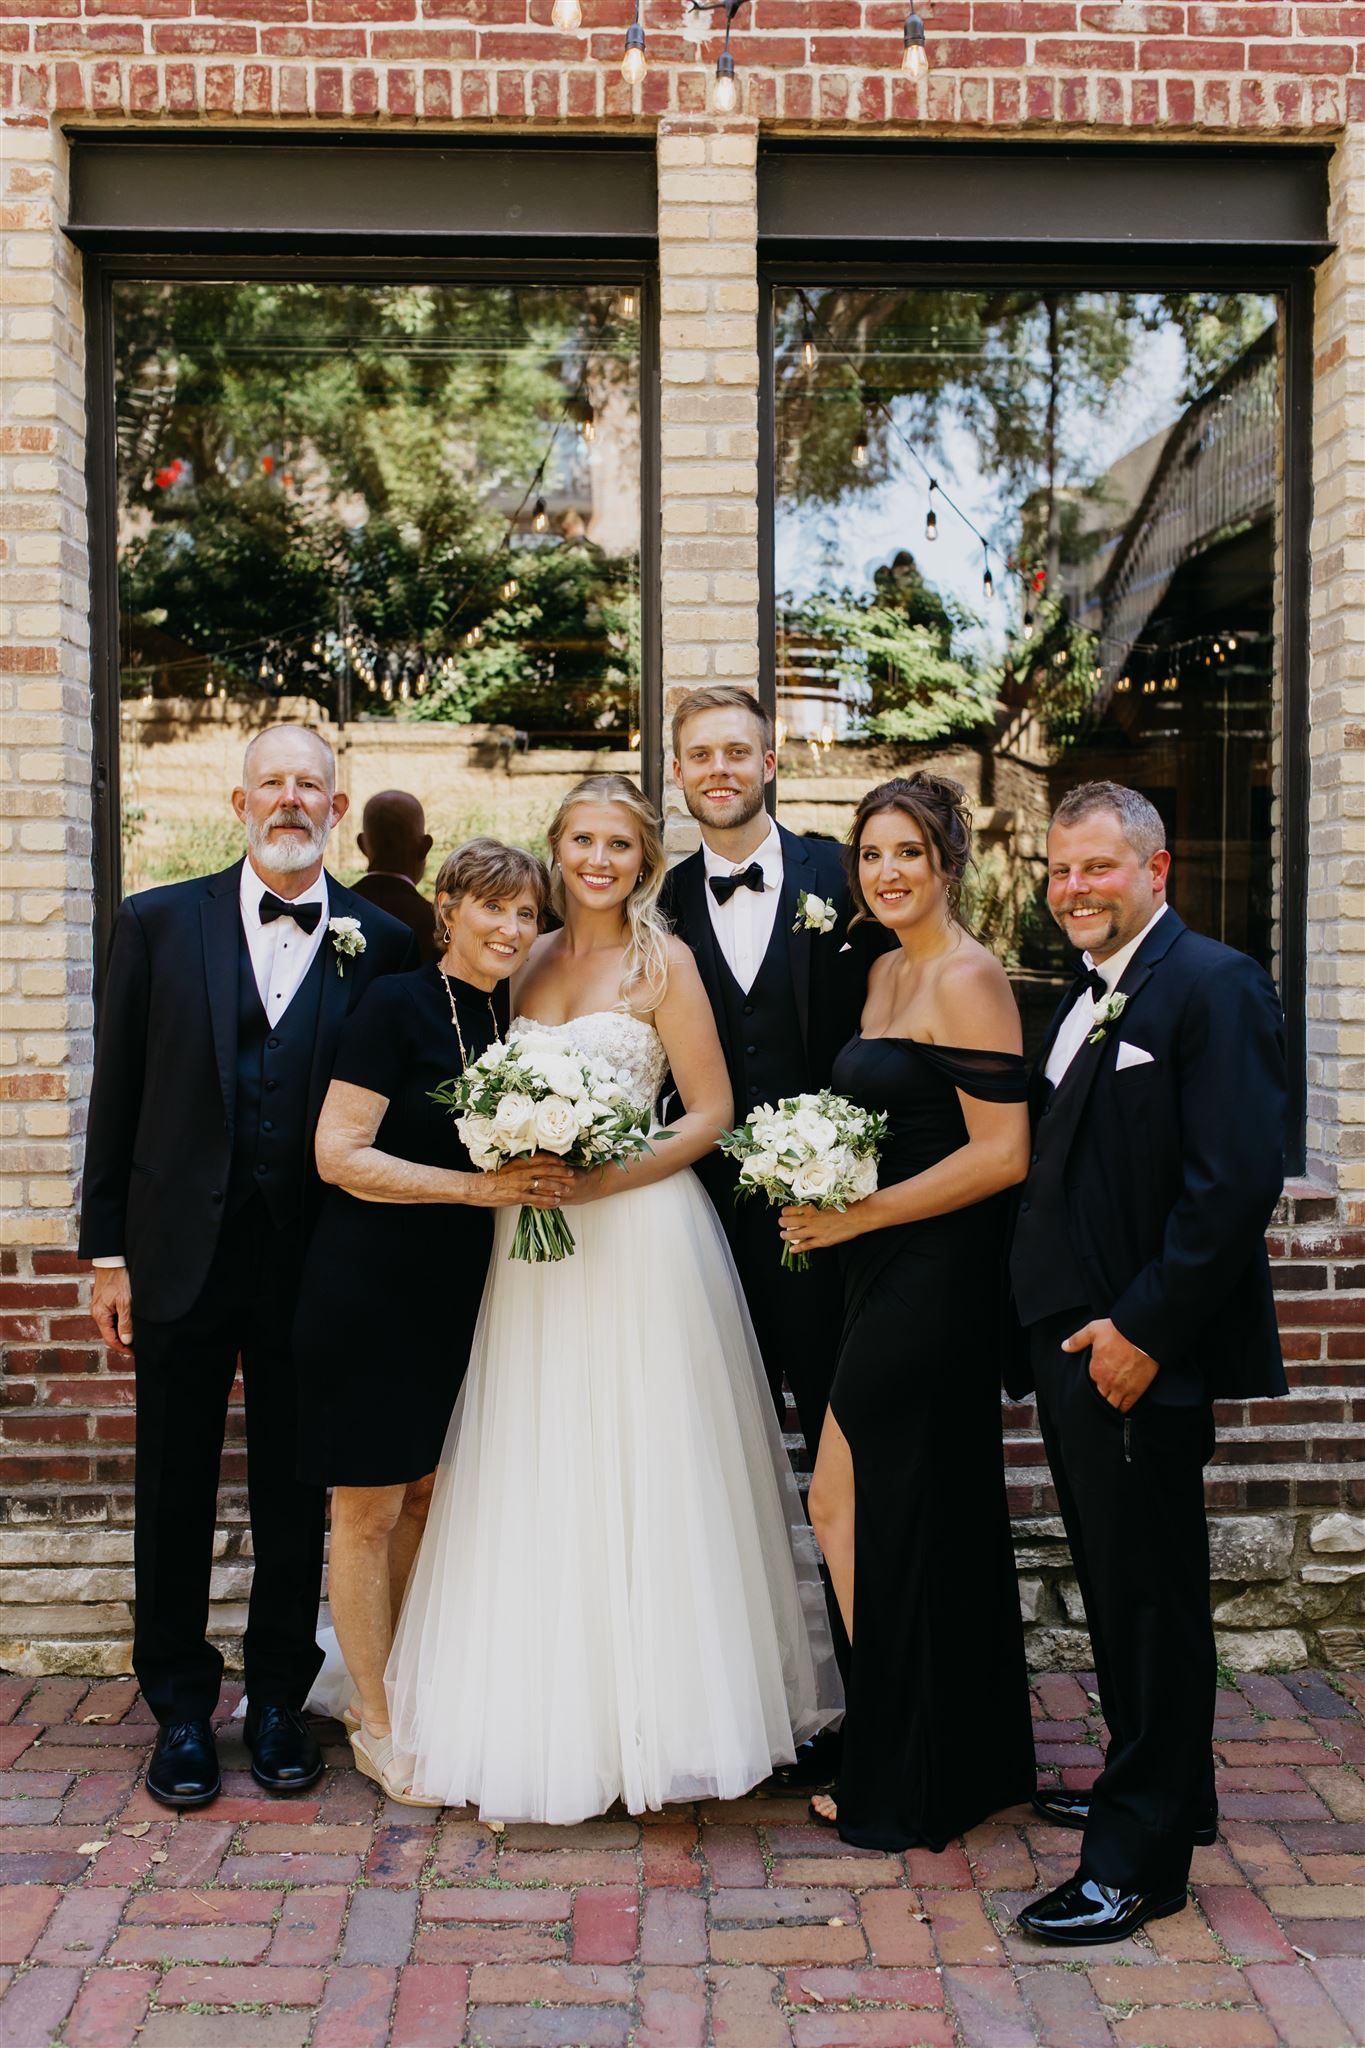 Family photo with the bride and groom on wedding day